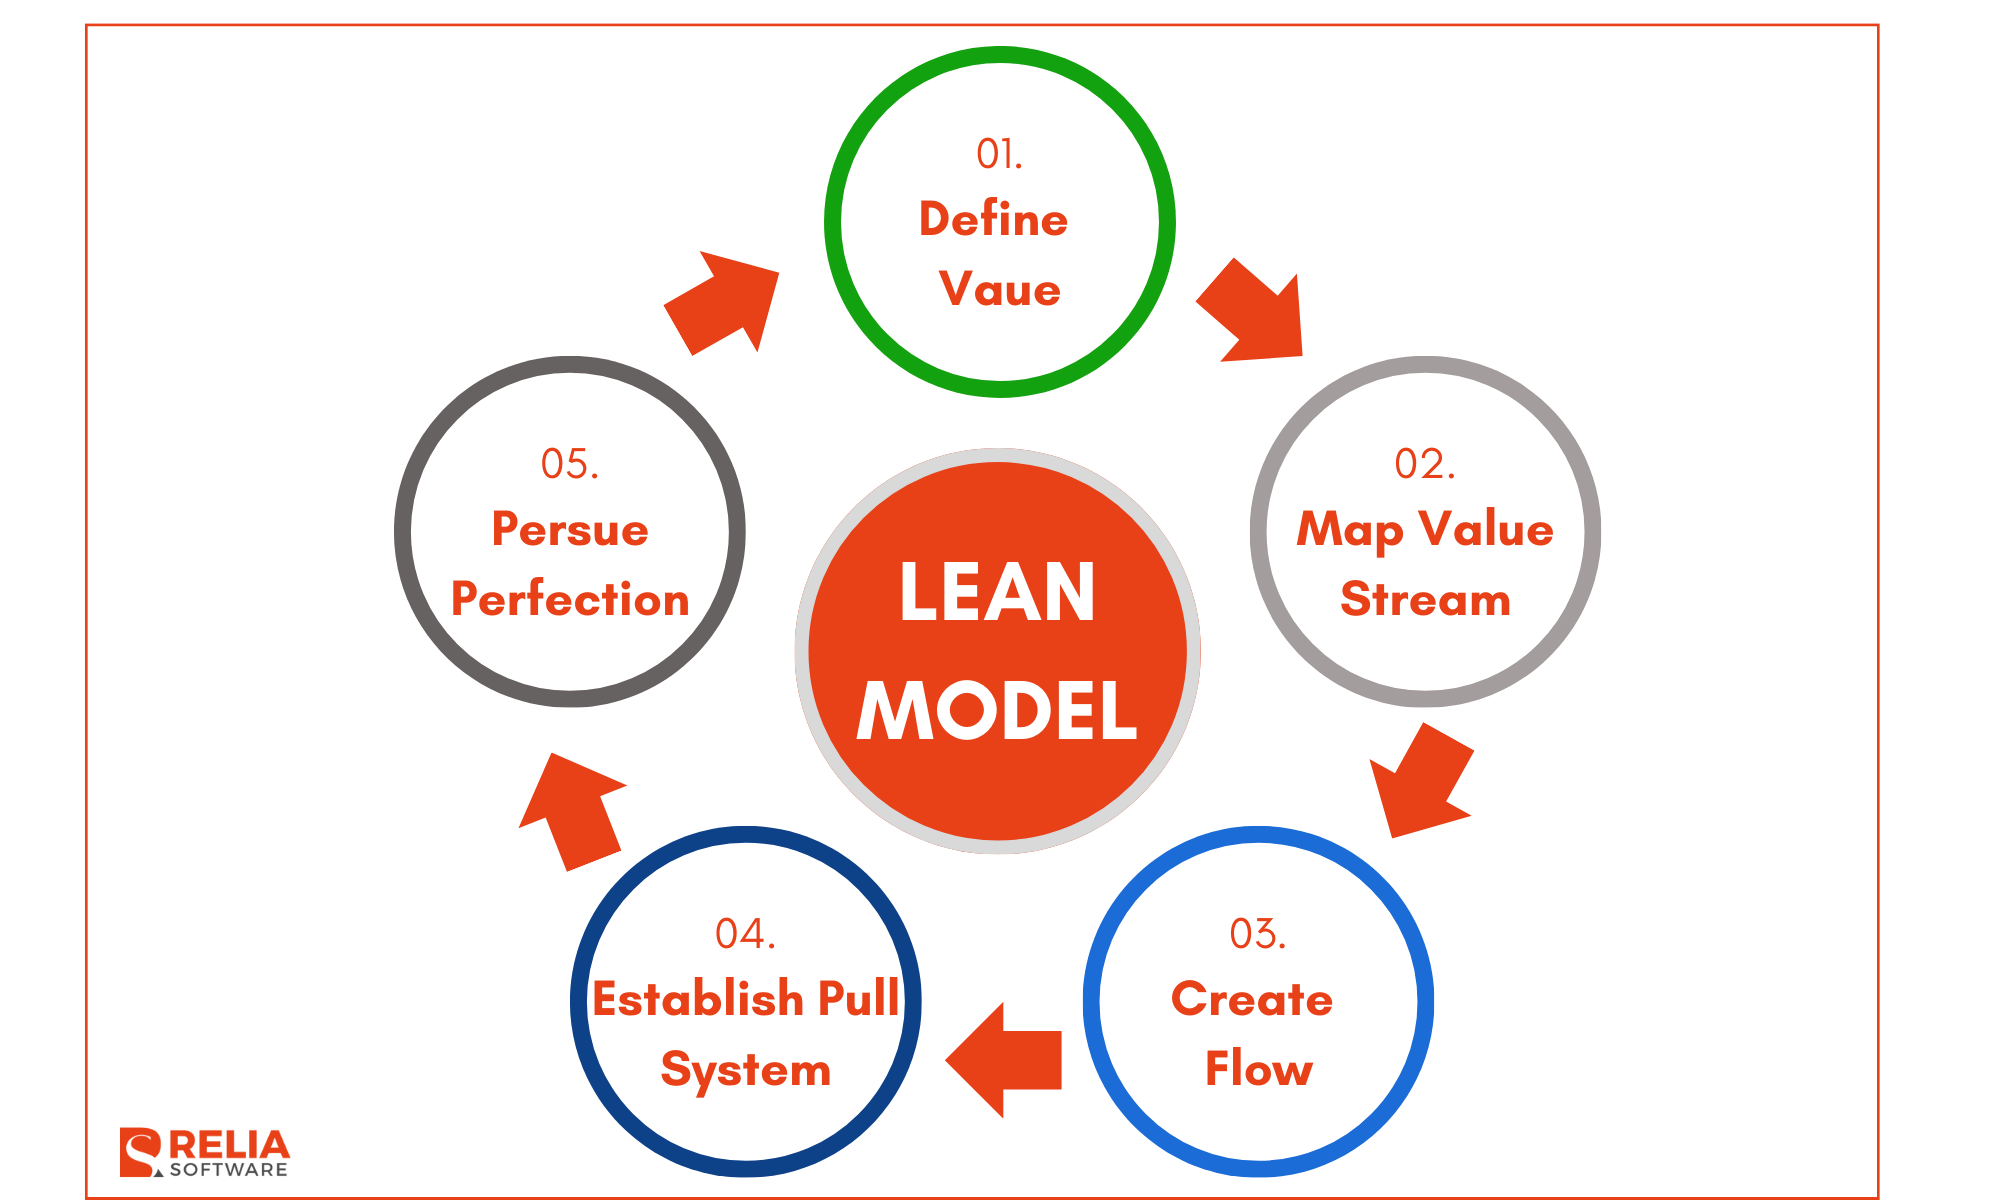 The Lean Model is a software development approach derived from lean manufacturing principles.